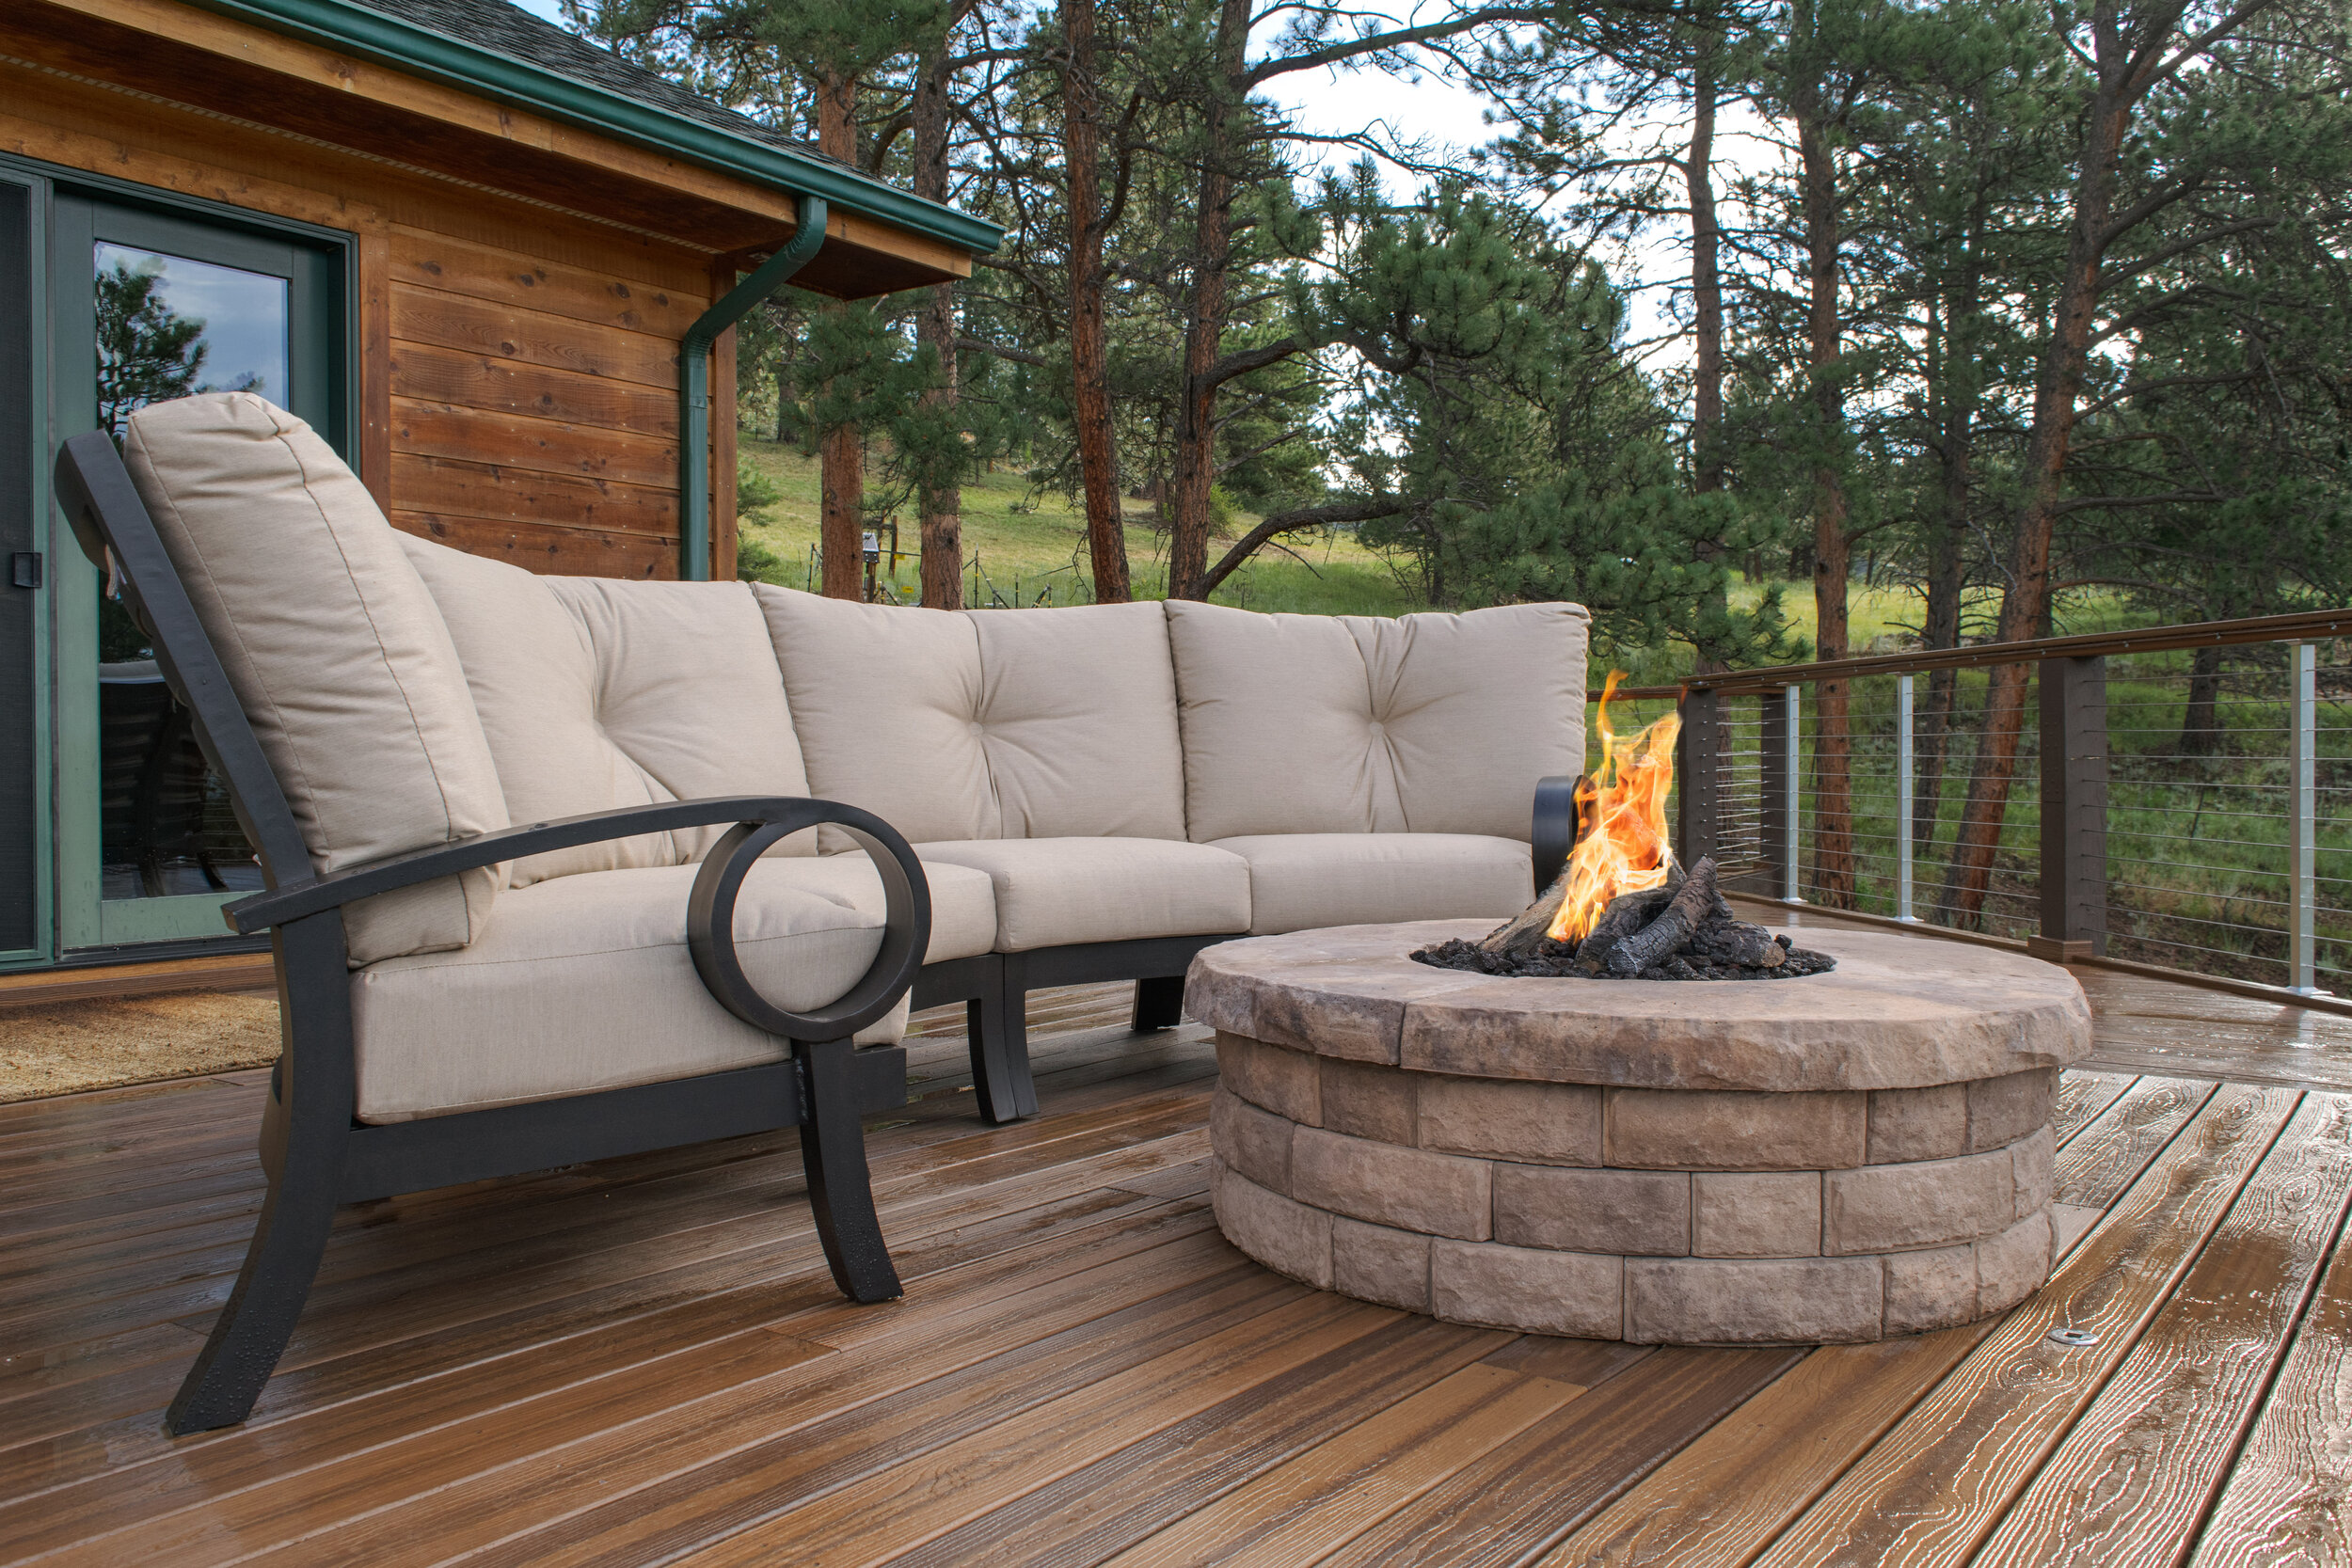 Outdoor Space With A Gas Fire Pit, Is It Safe To Put Gas Fire Pit On Deck